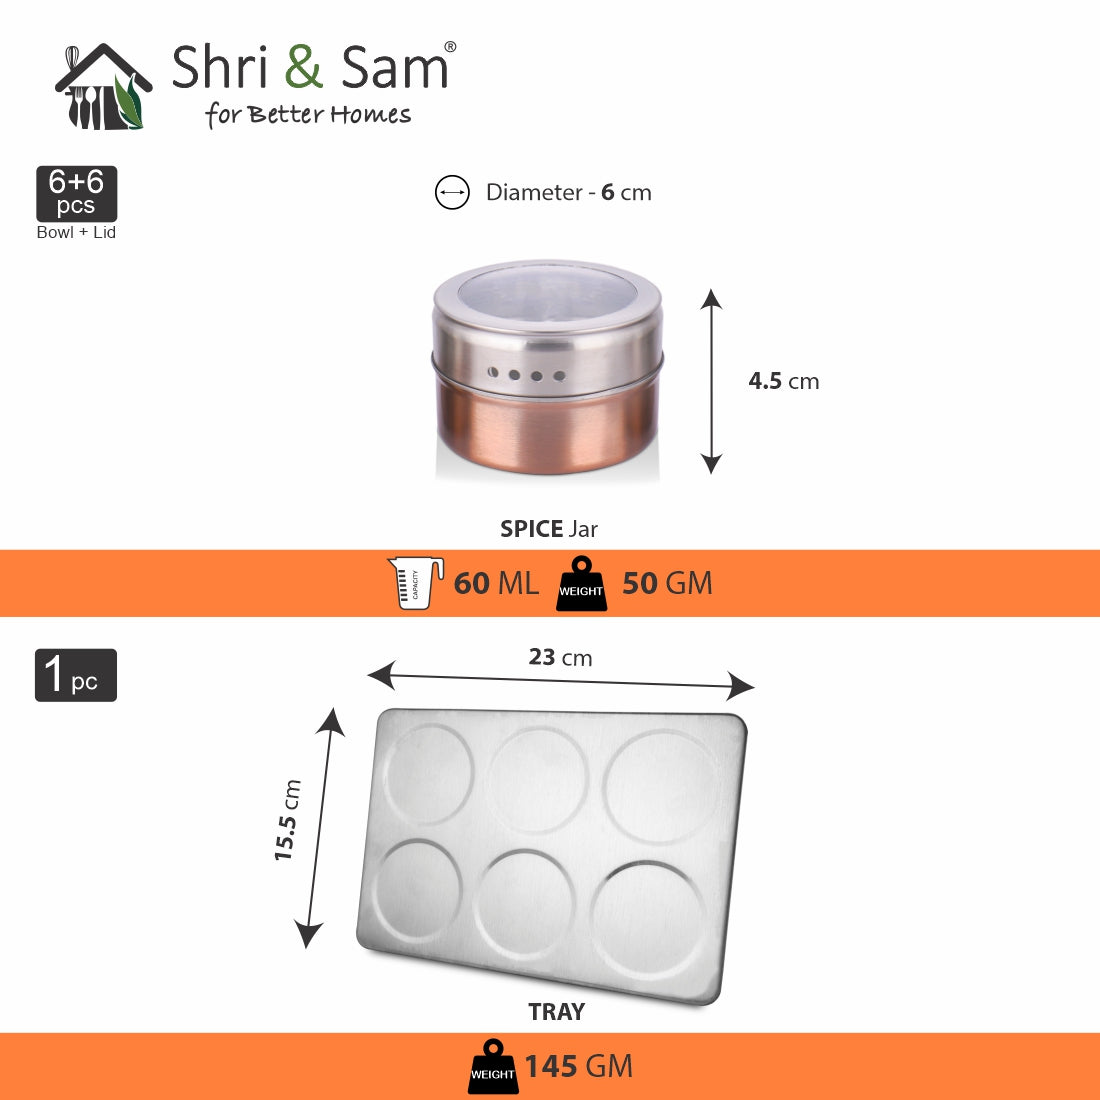 Stainless Steel 7 PCS Spice Jar Set with Tray